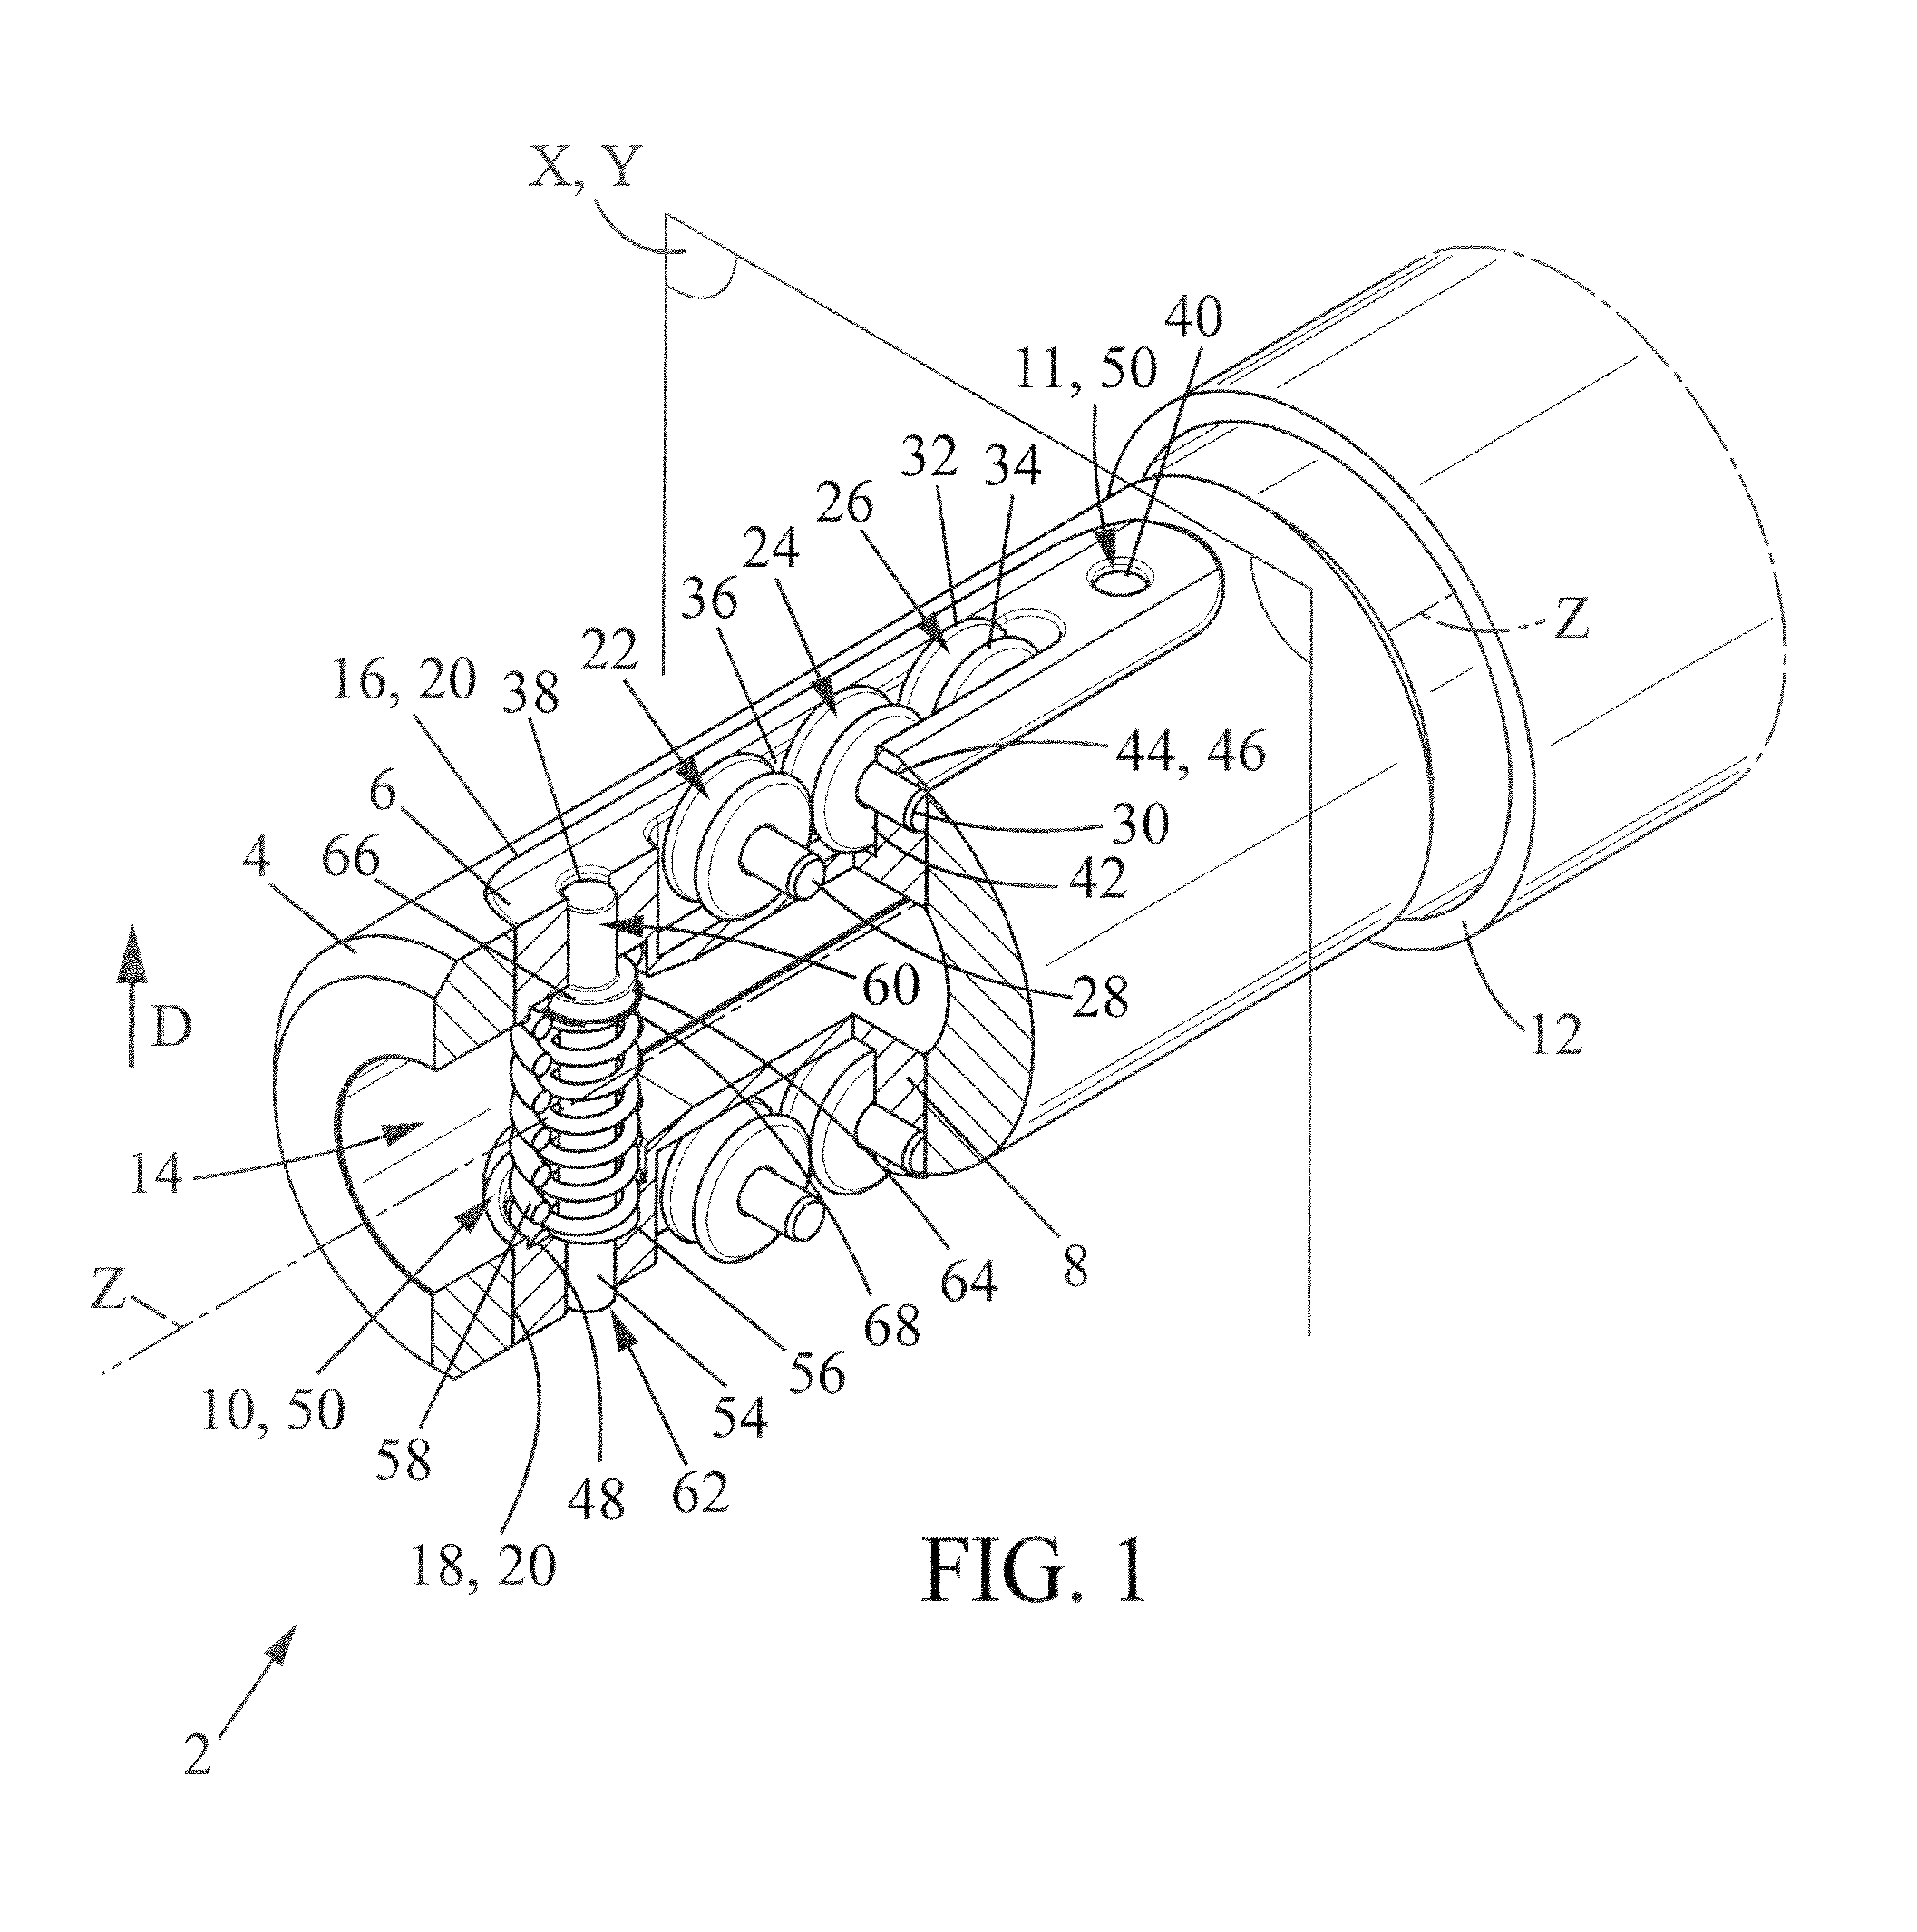 Torque anchor for blocking the rotation of a production string of a well